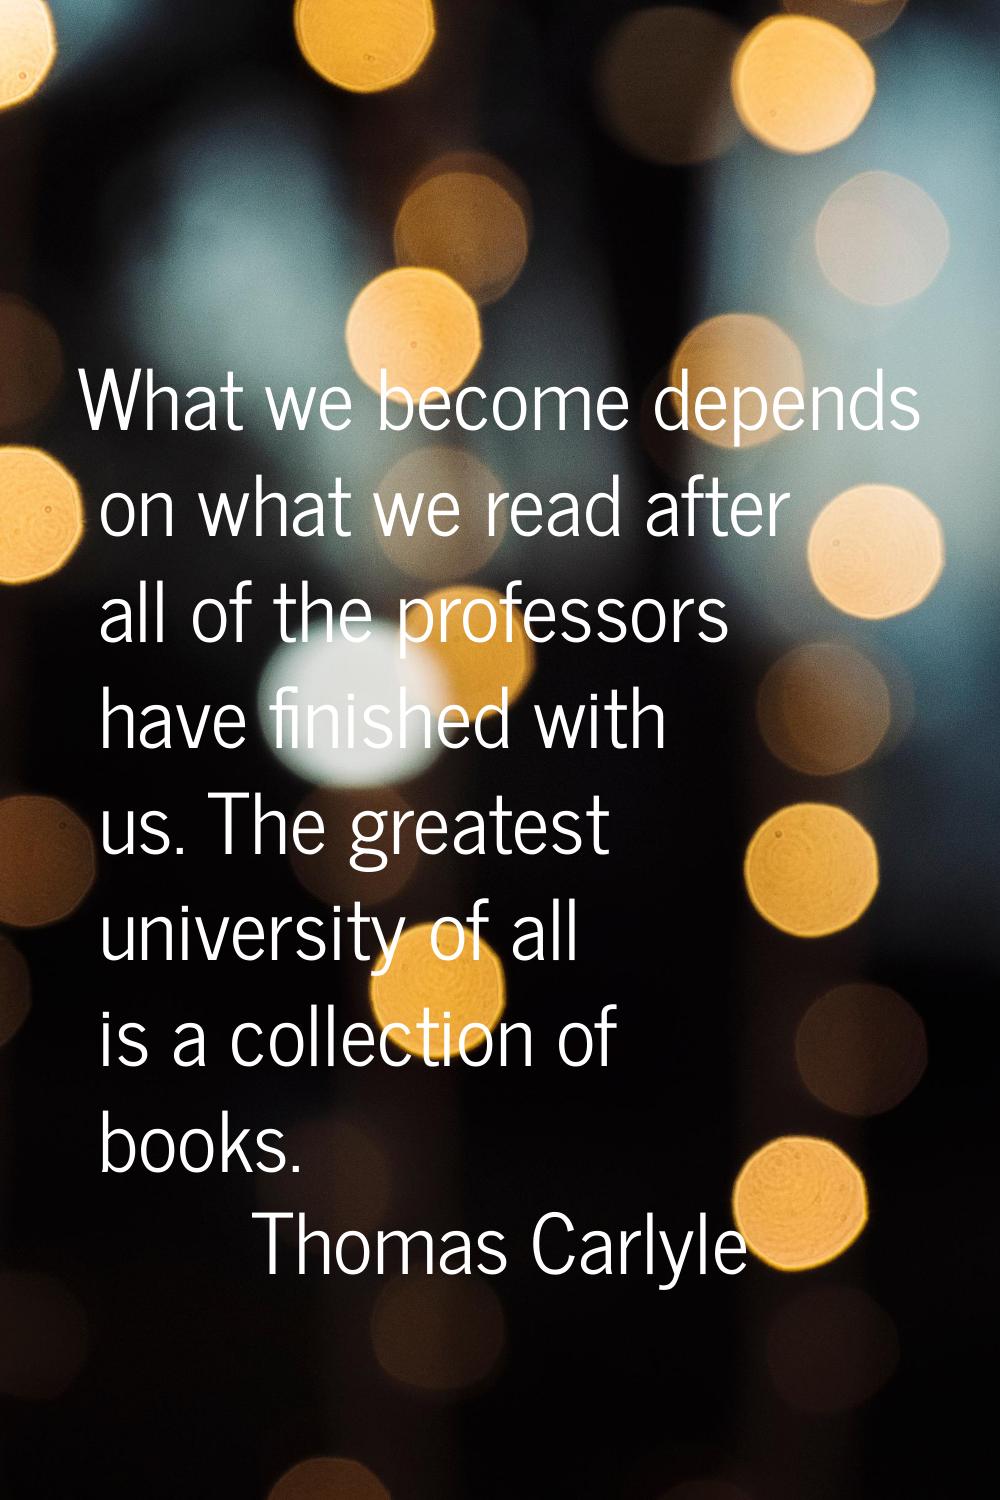 What we become depends on what we read after all of the professors have finished with us. The great